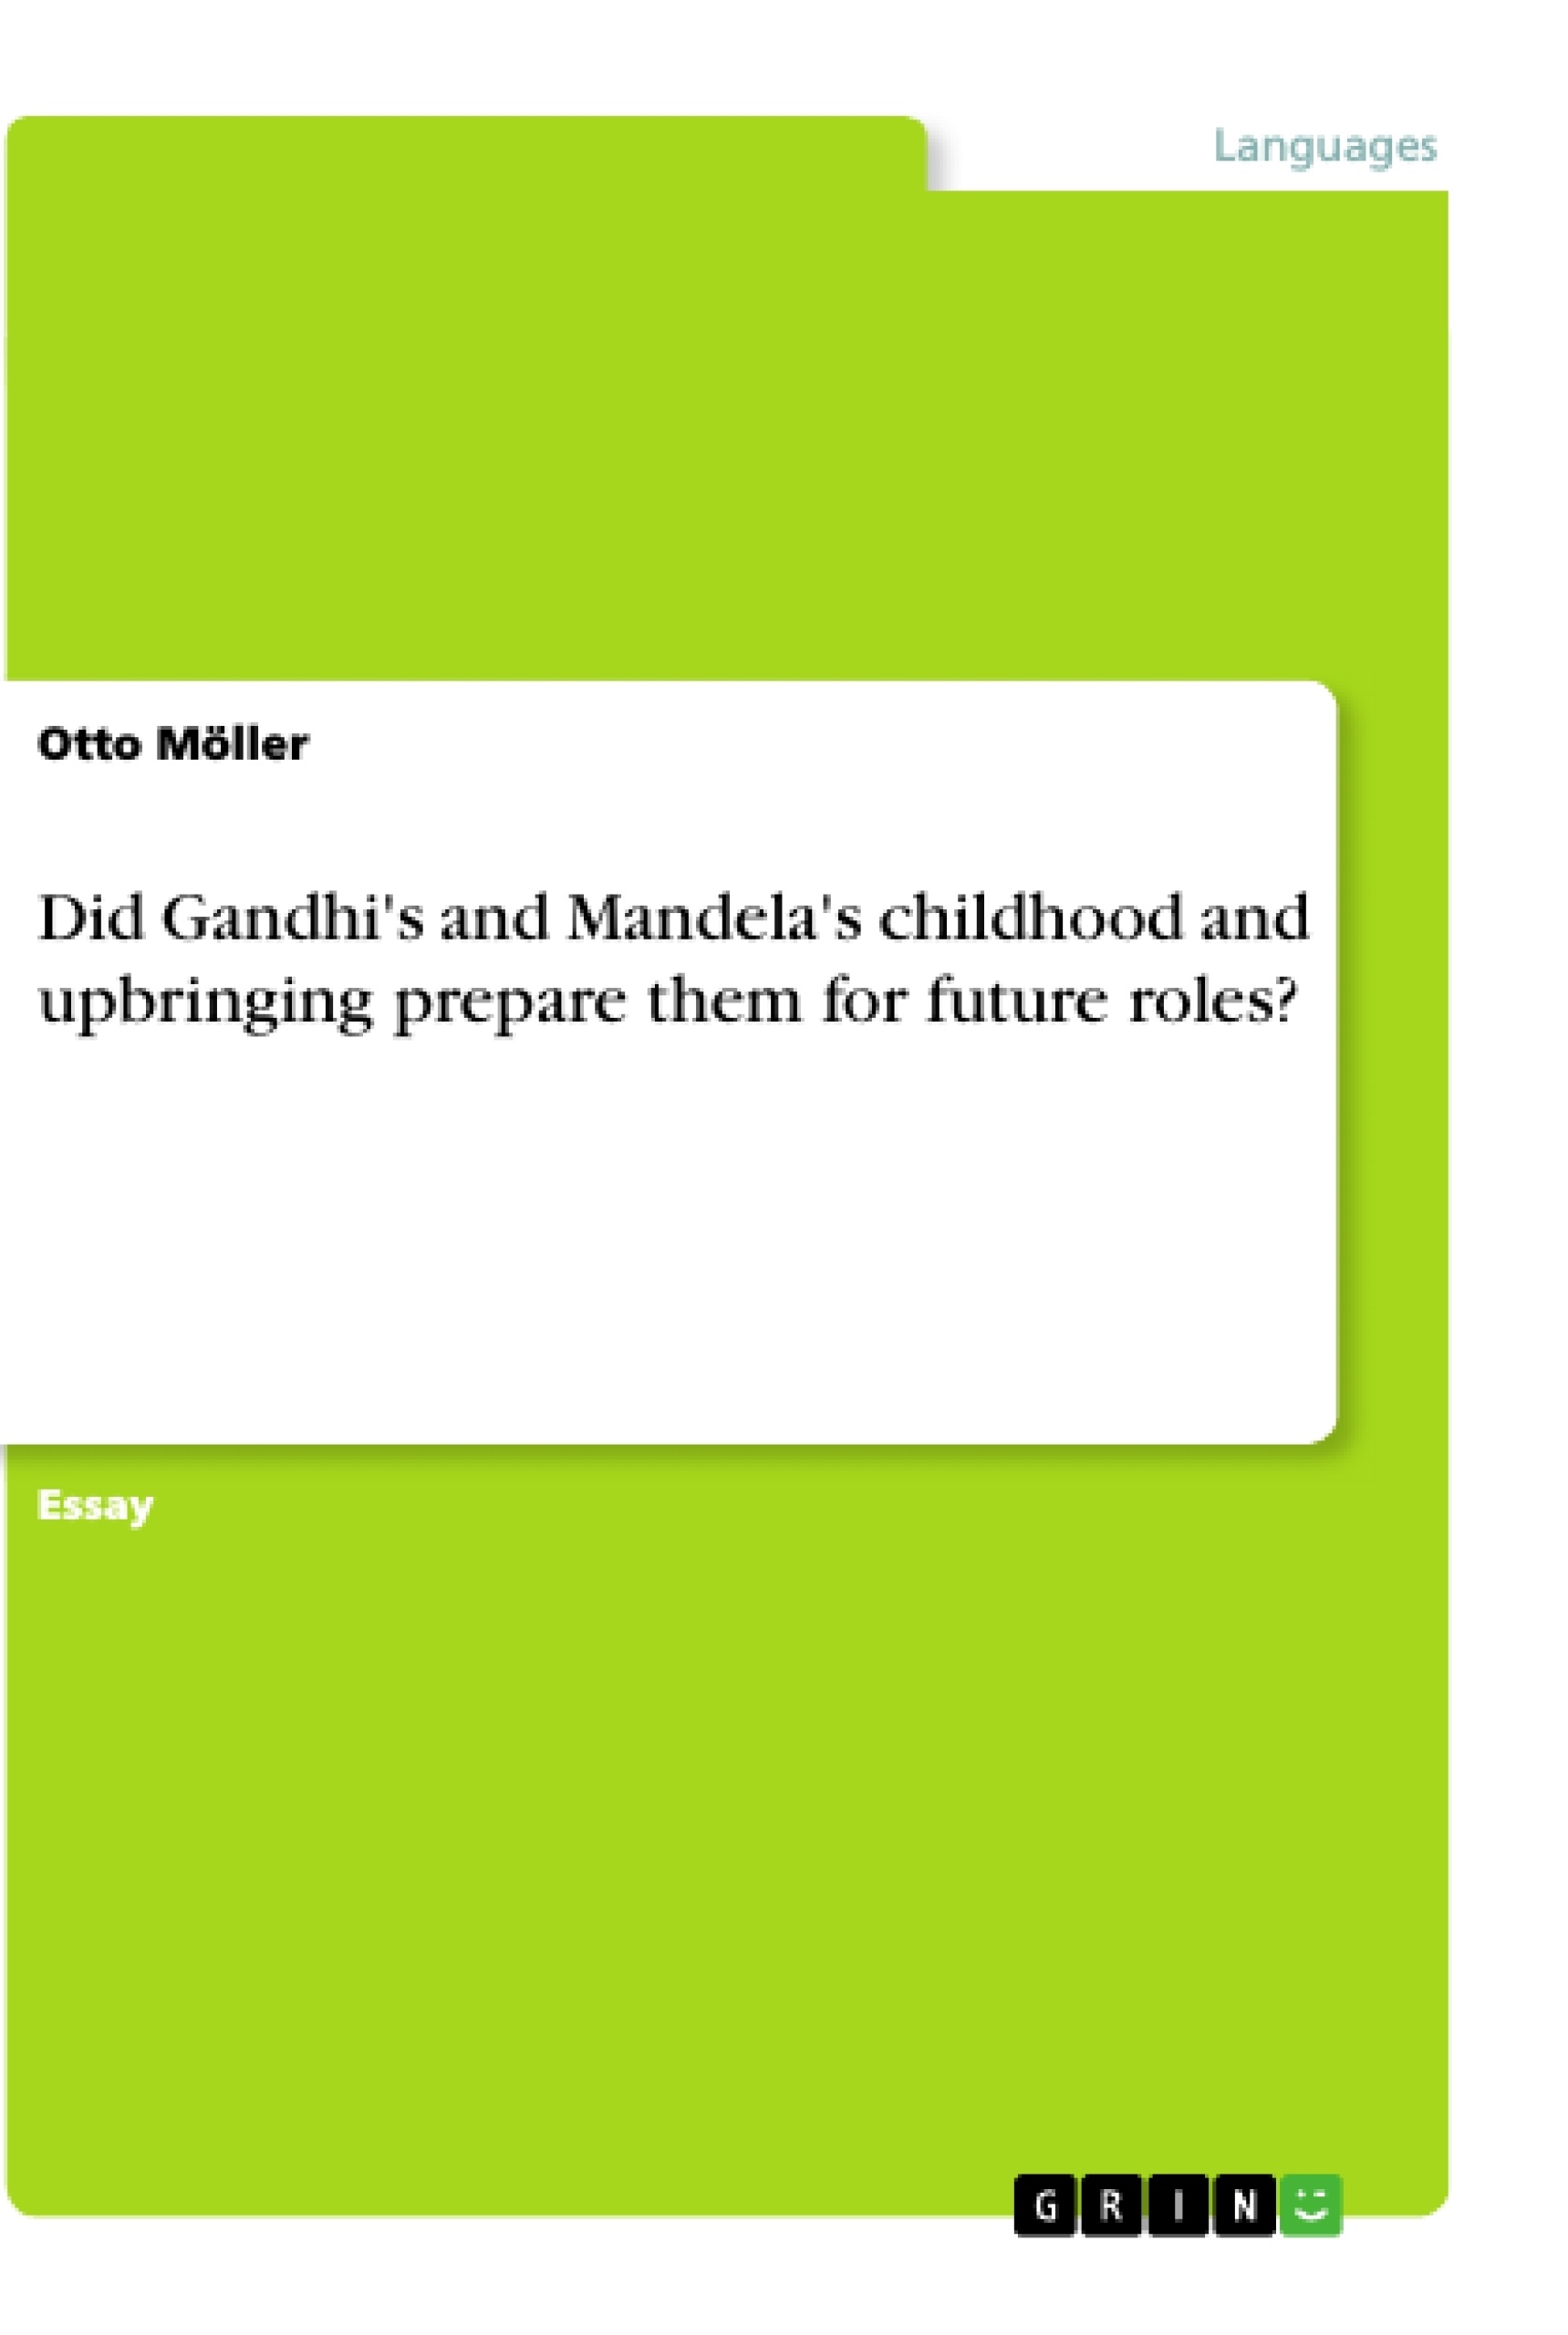 Título: Did Gandhi's and Mandela's childhood and upbringing prepare them for future roles?